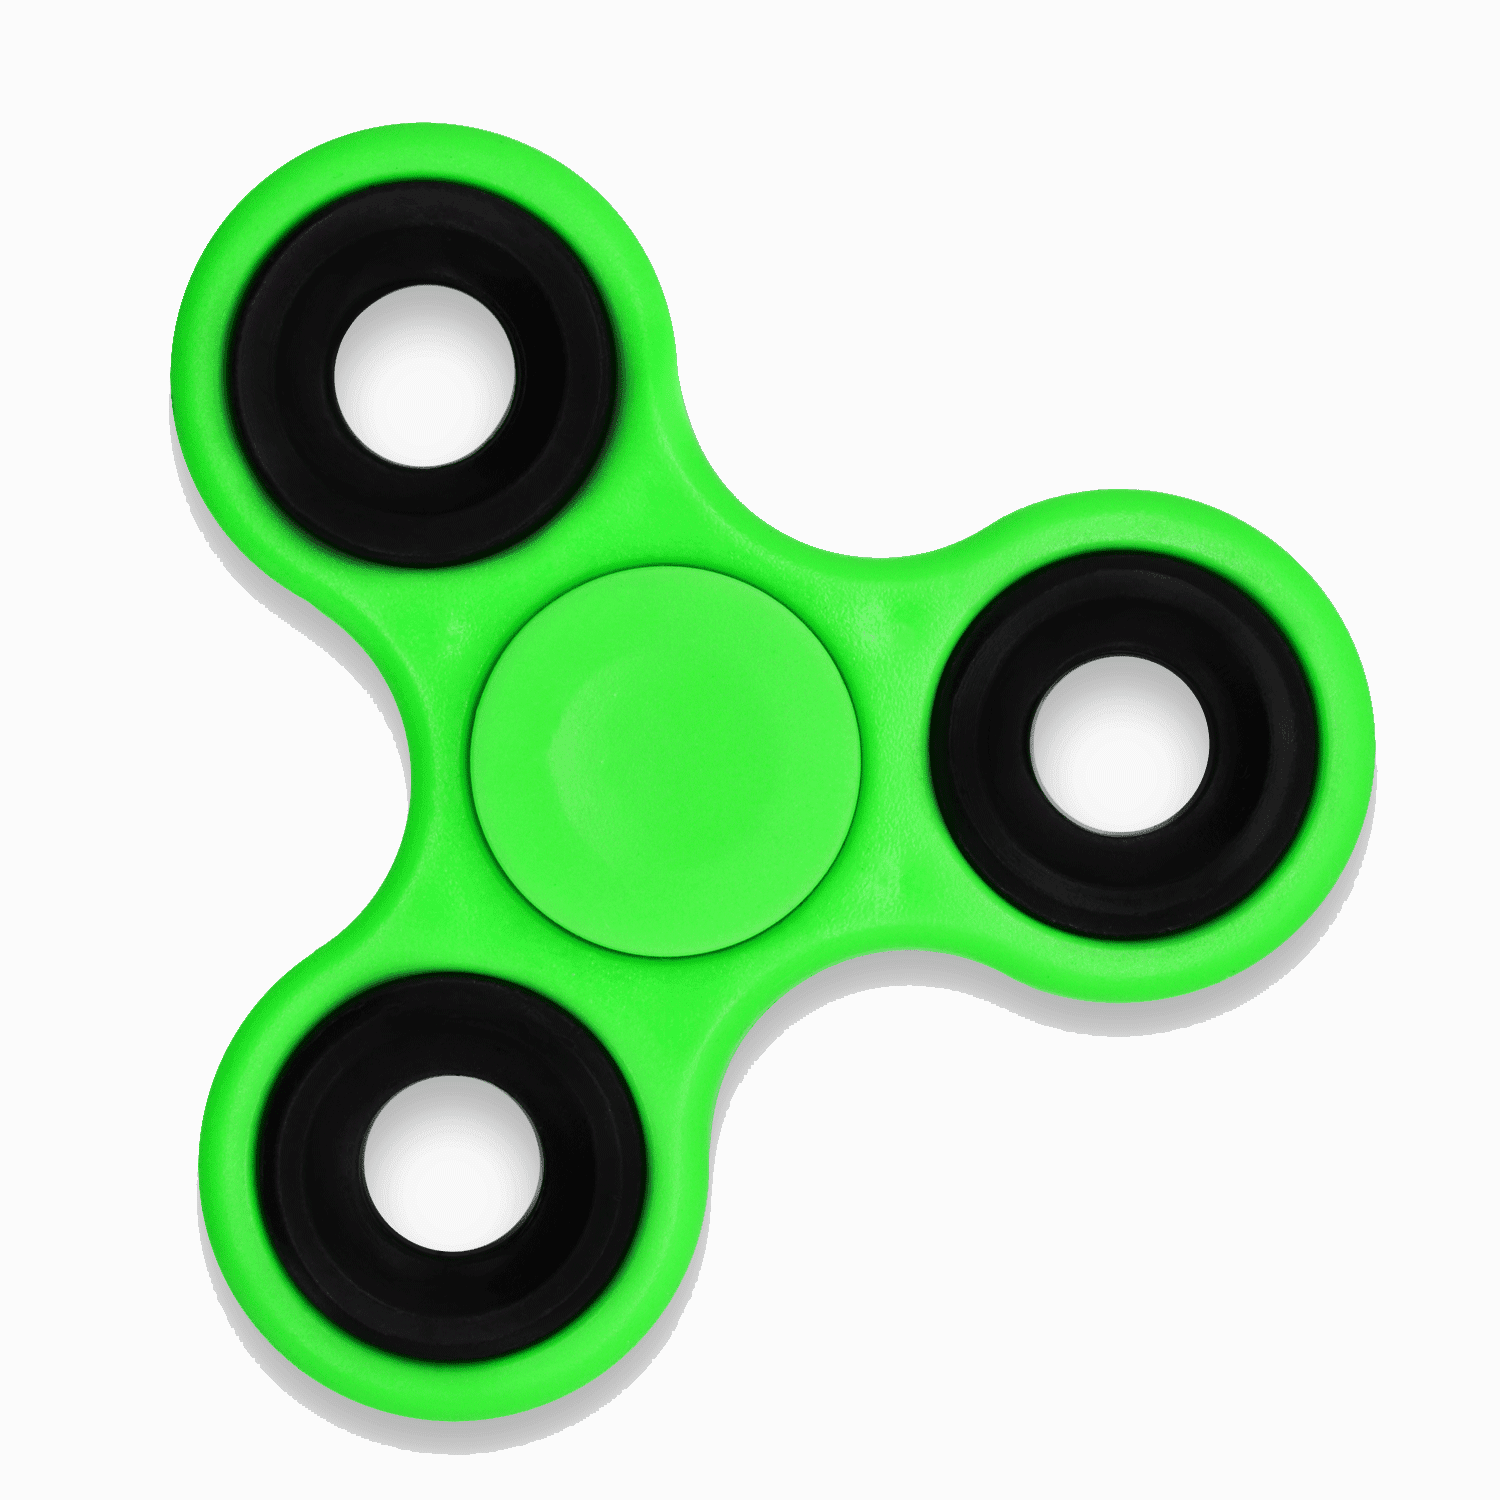 Tri-Spinner Hand Fidget Spinner Focus Toy Stress Relief With Case New Black 